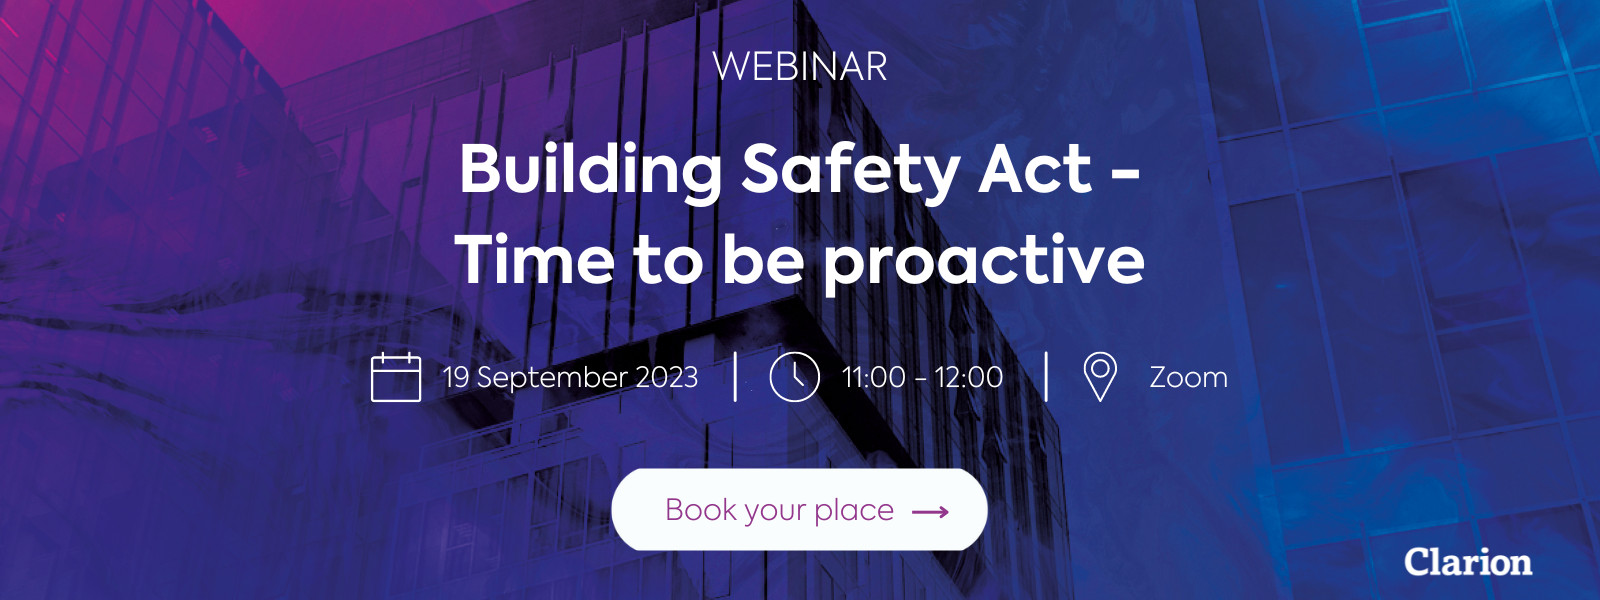 Webinar: Building Safety Act - Time to be proactiv...